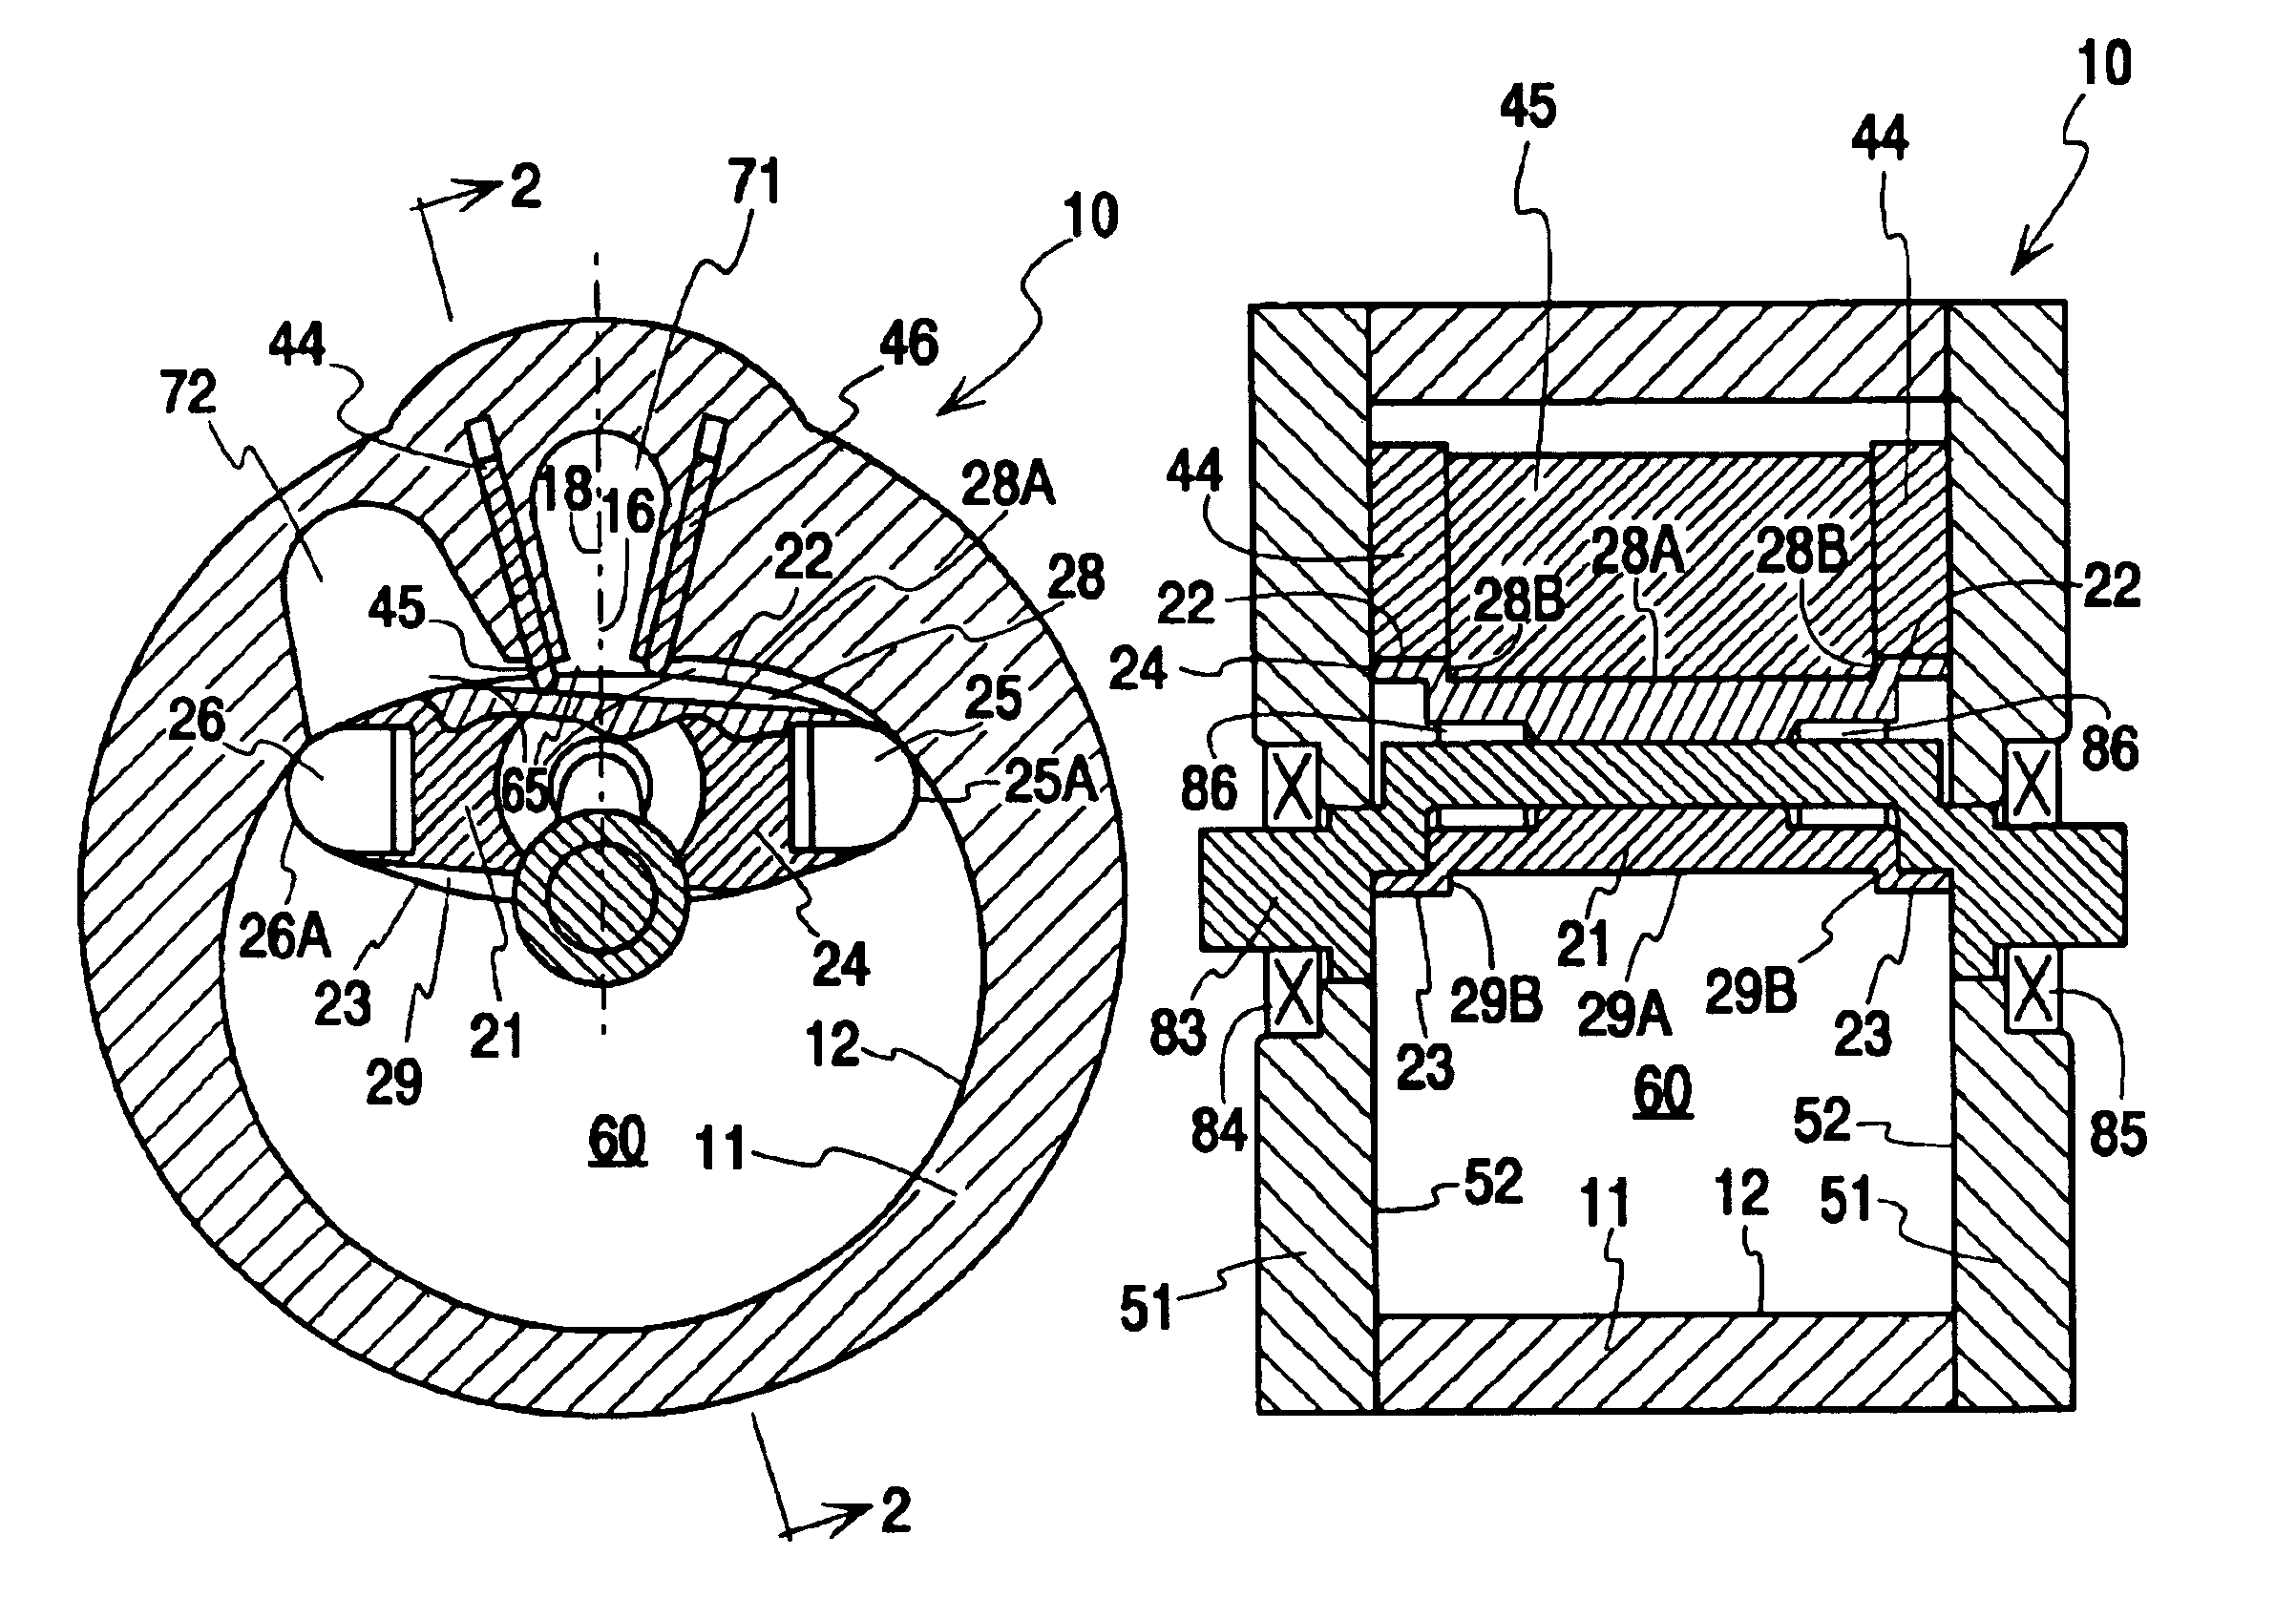 Rotary machine housing with radially mounted sliding vanes